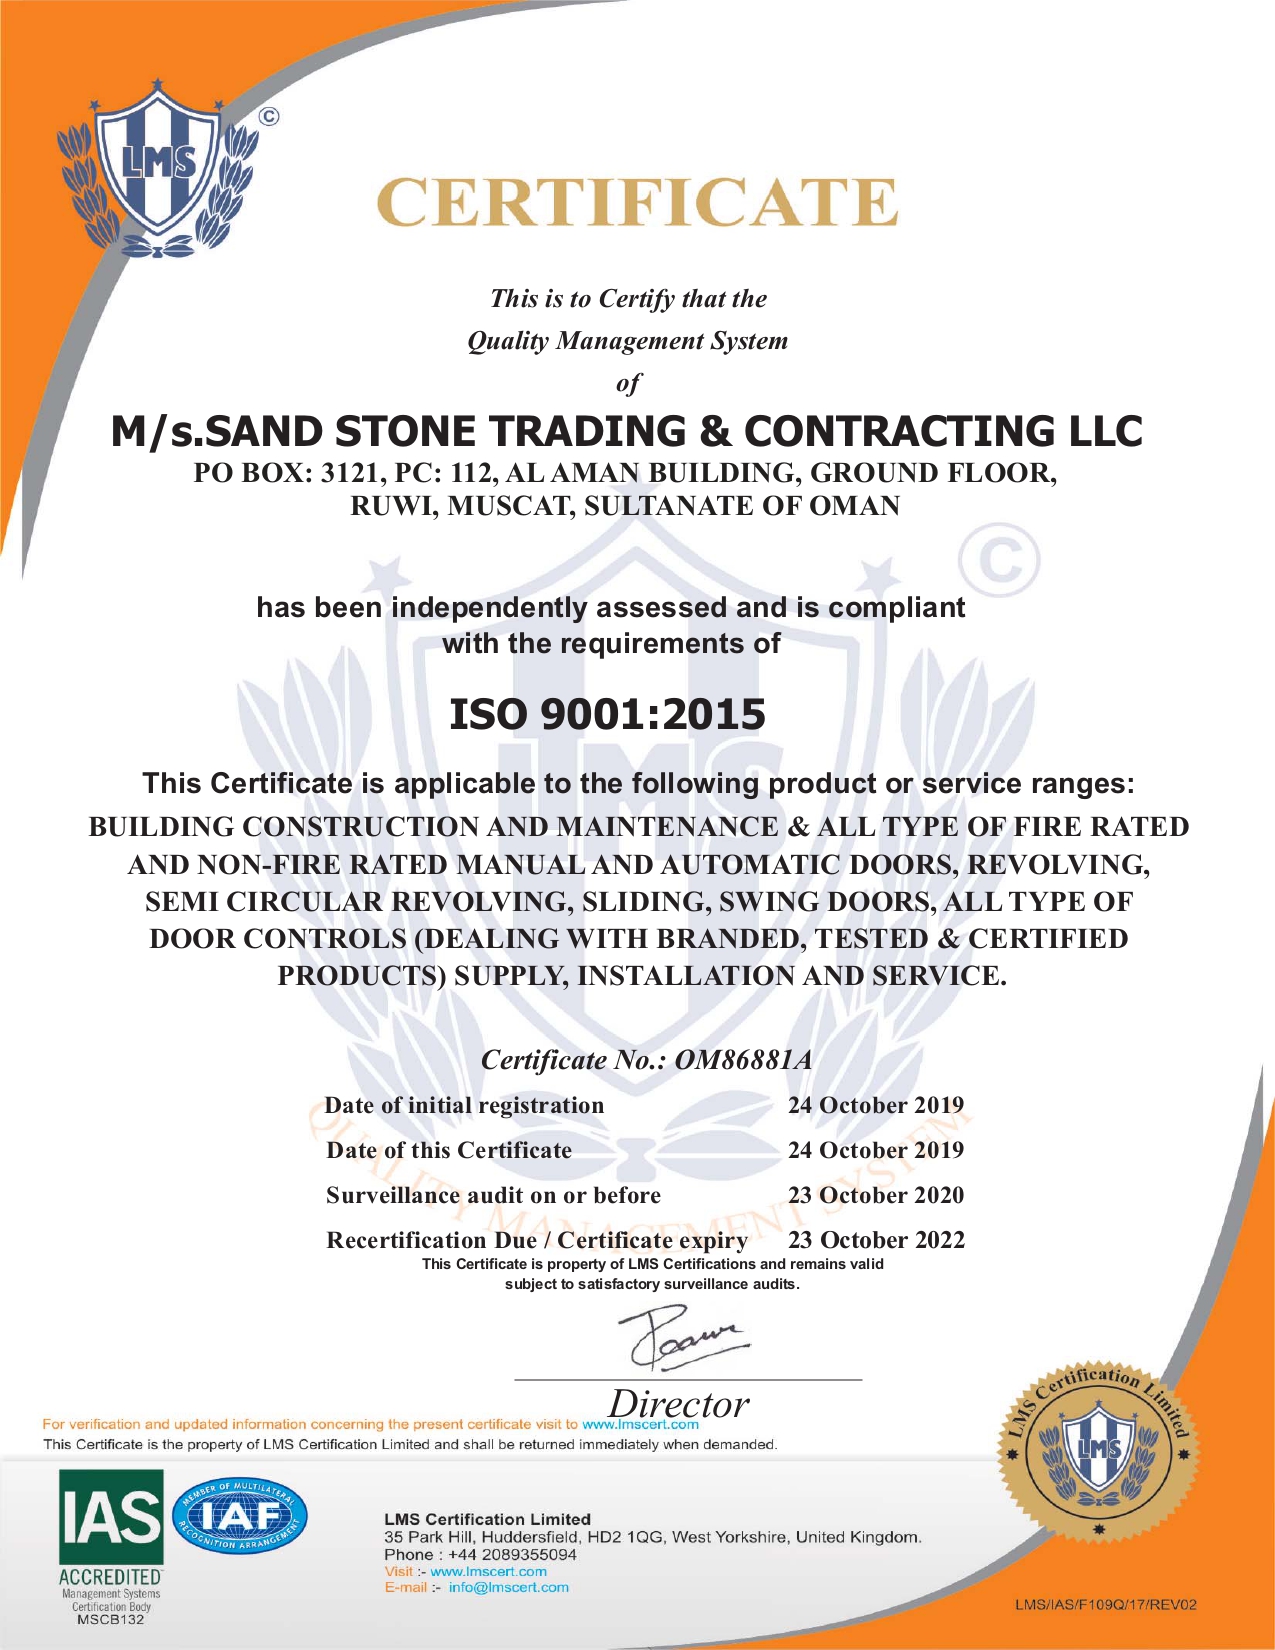 Sand Stone Trading & Contracting LLC